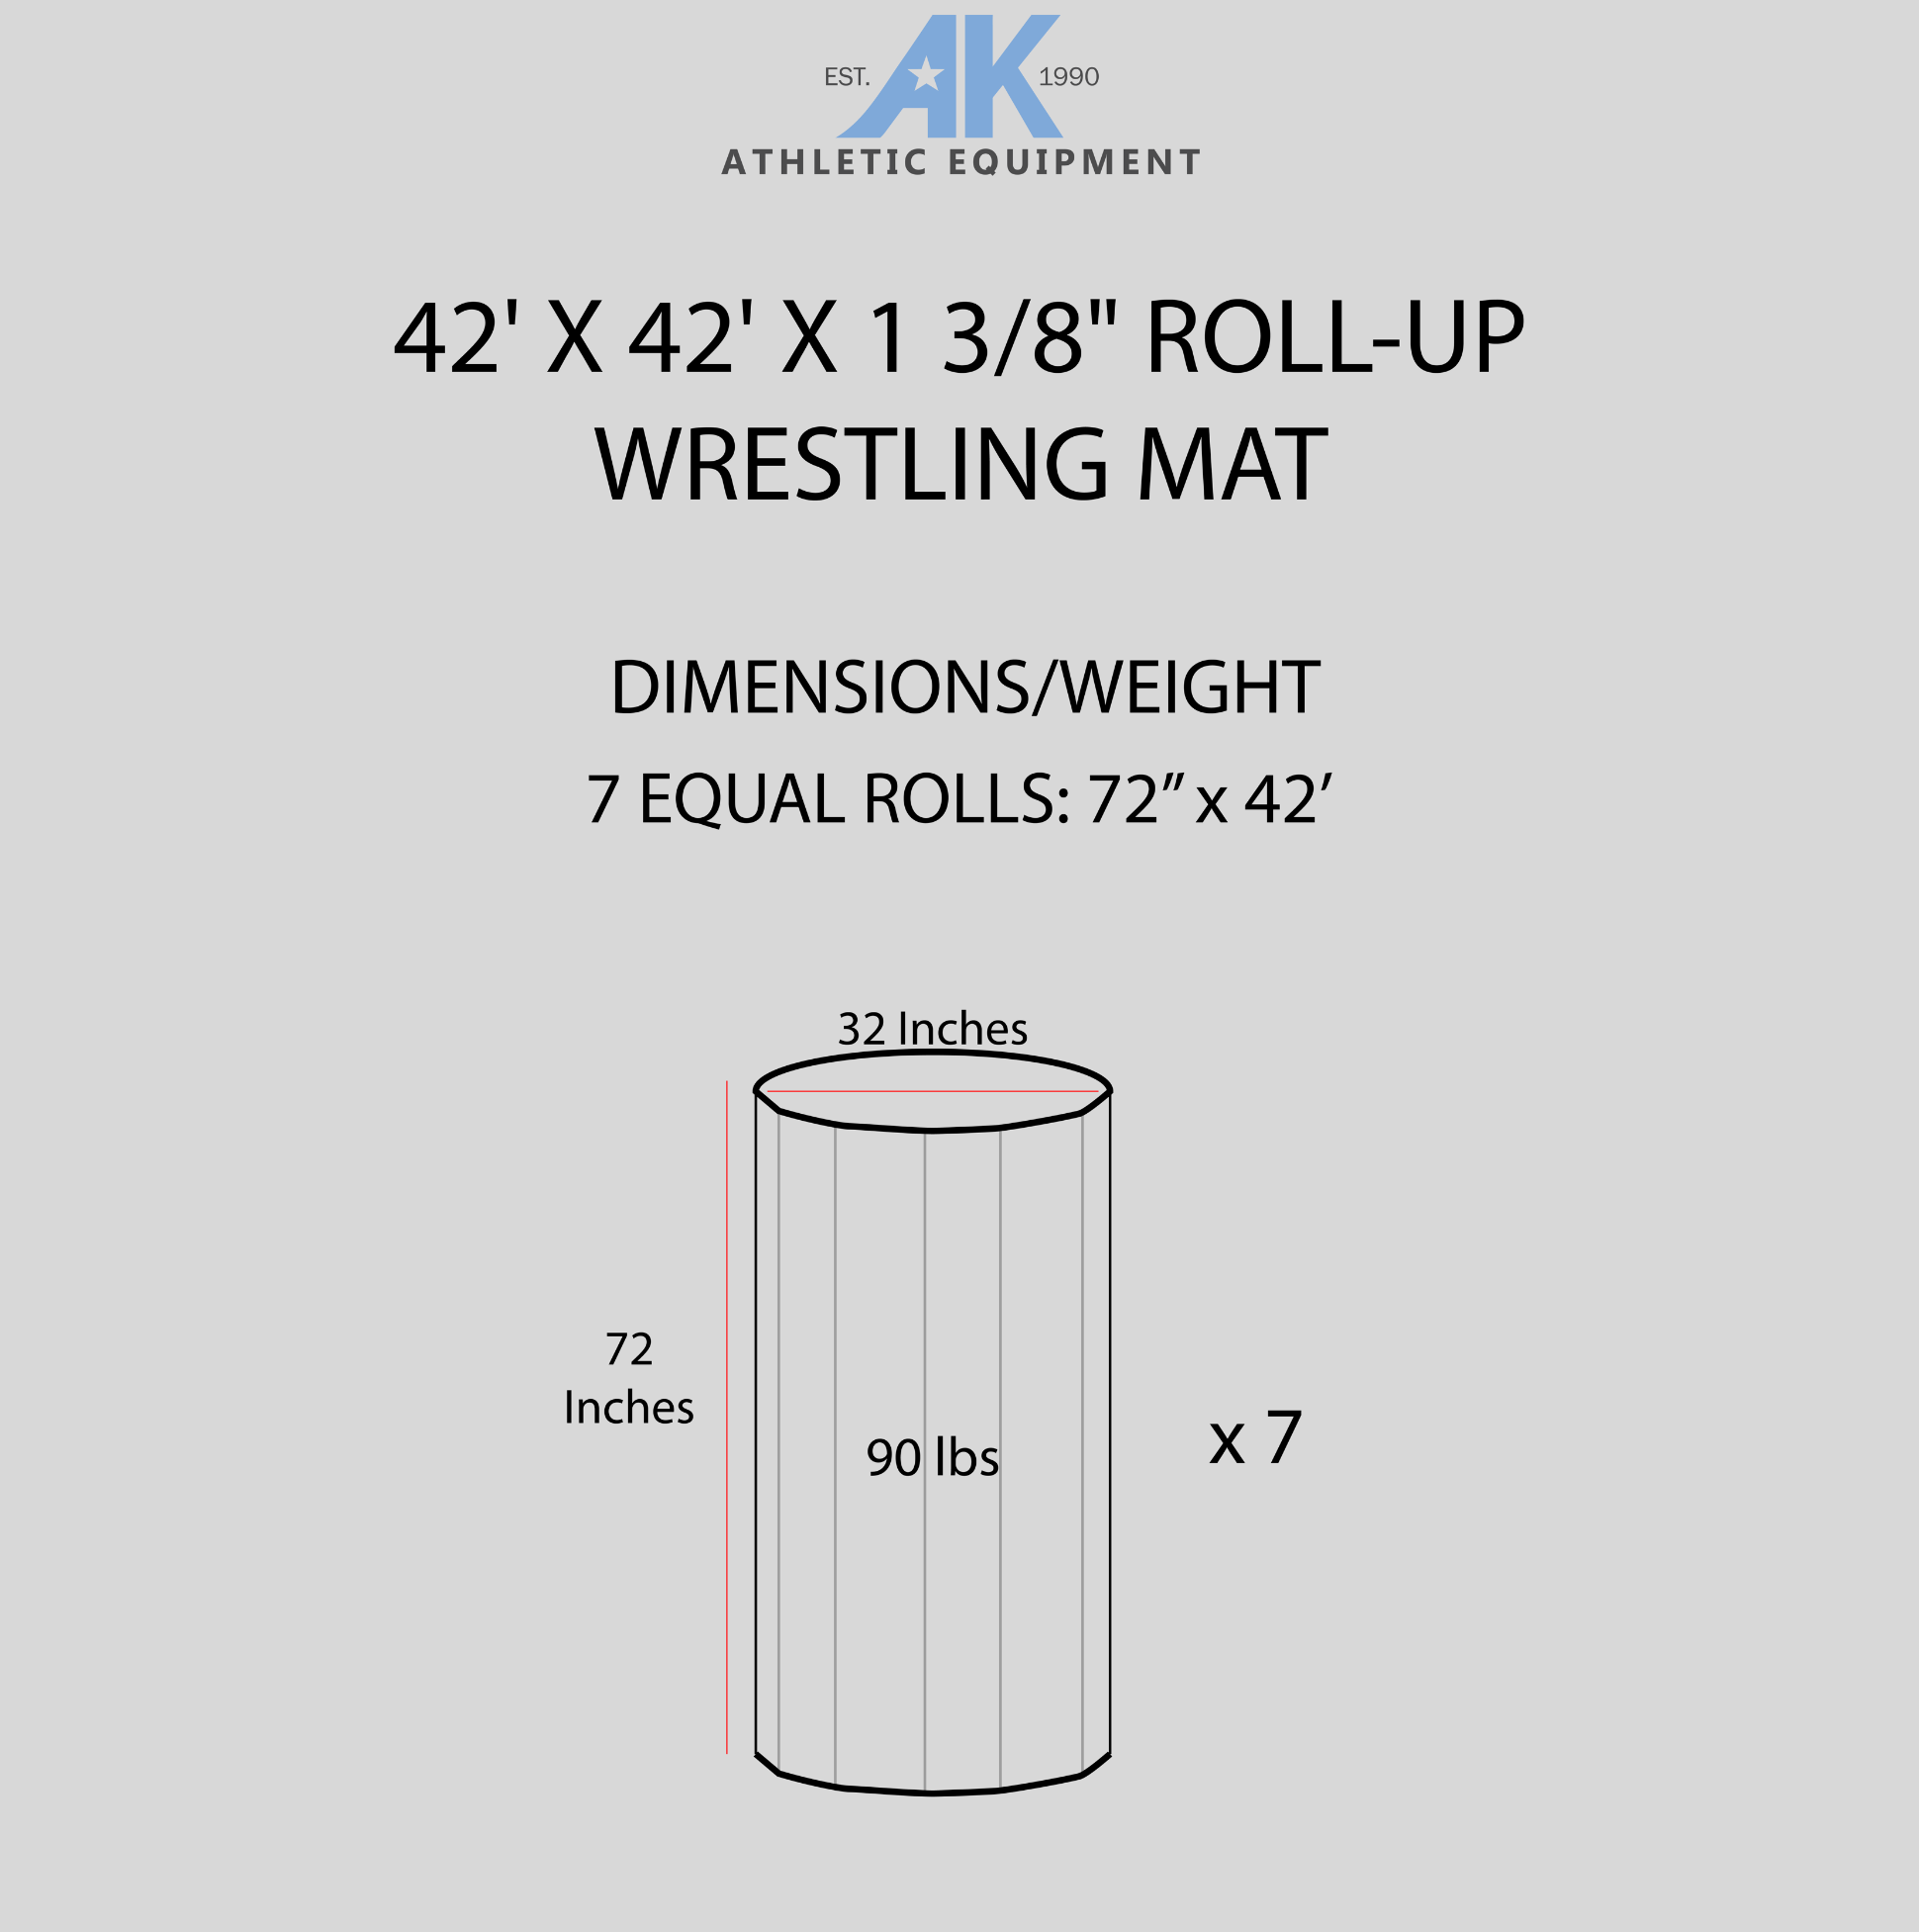 AK Athletics, Industry leader in wrestling mats and mixed martial arts mats. Storage dimensions for the 42 x 42 roll-up wrestling mat.